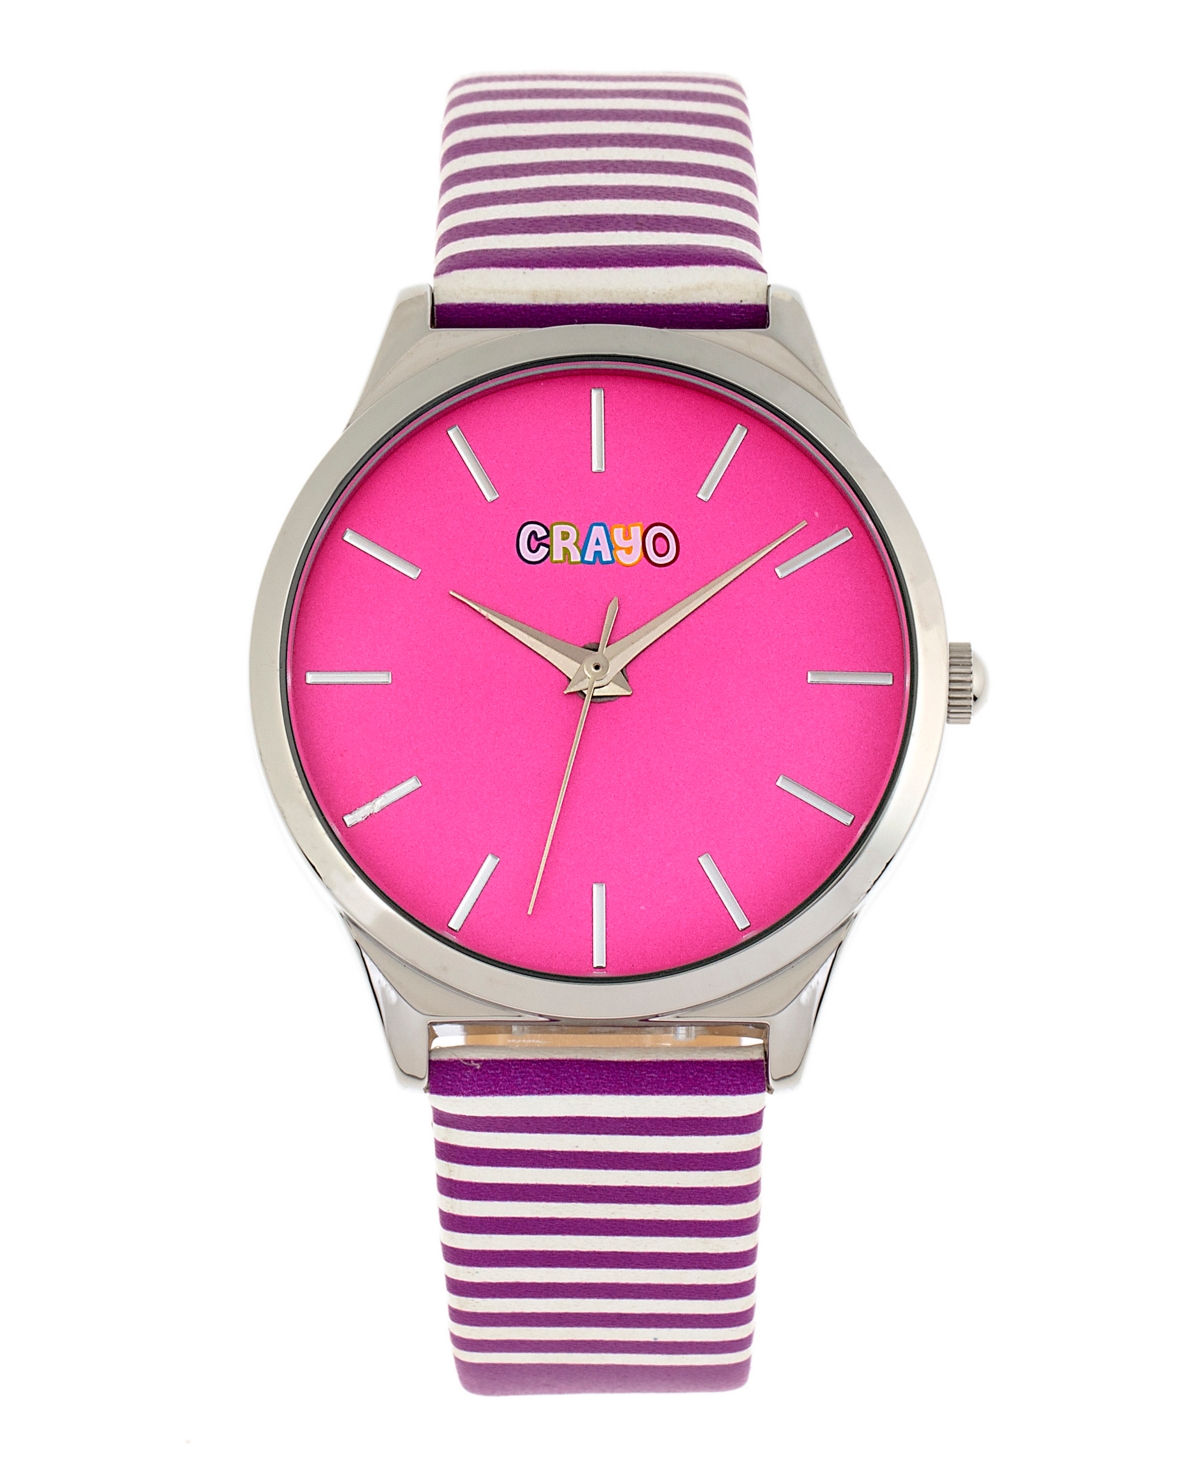 Crayo Aboard Unisex Red and White or Gray or Green or Purple or Black or Orange Leatherette Strap Watch, 40mm